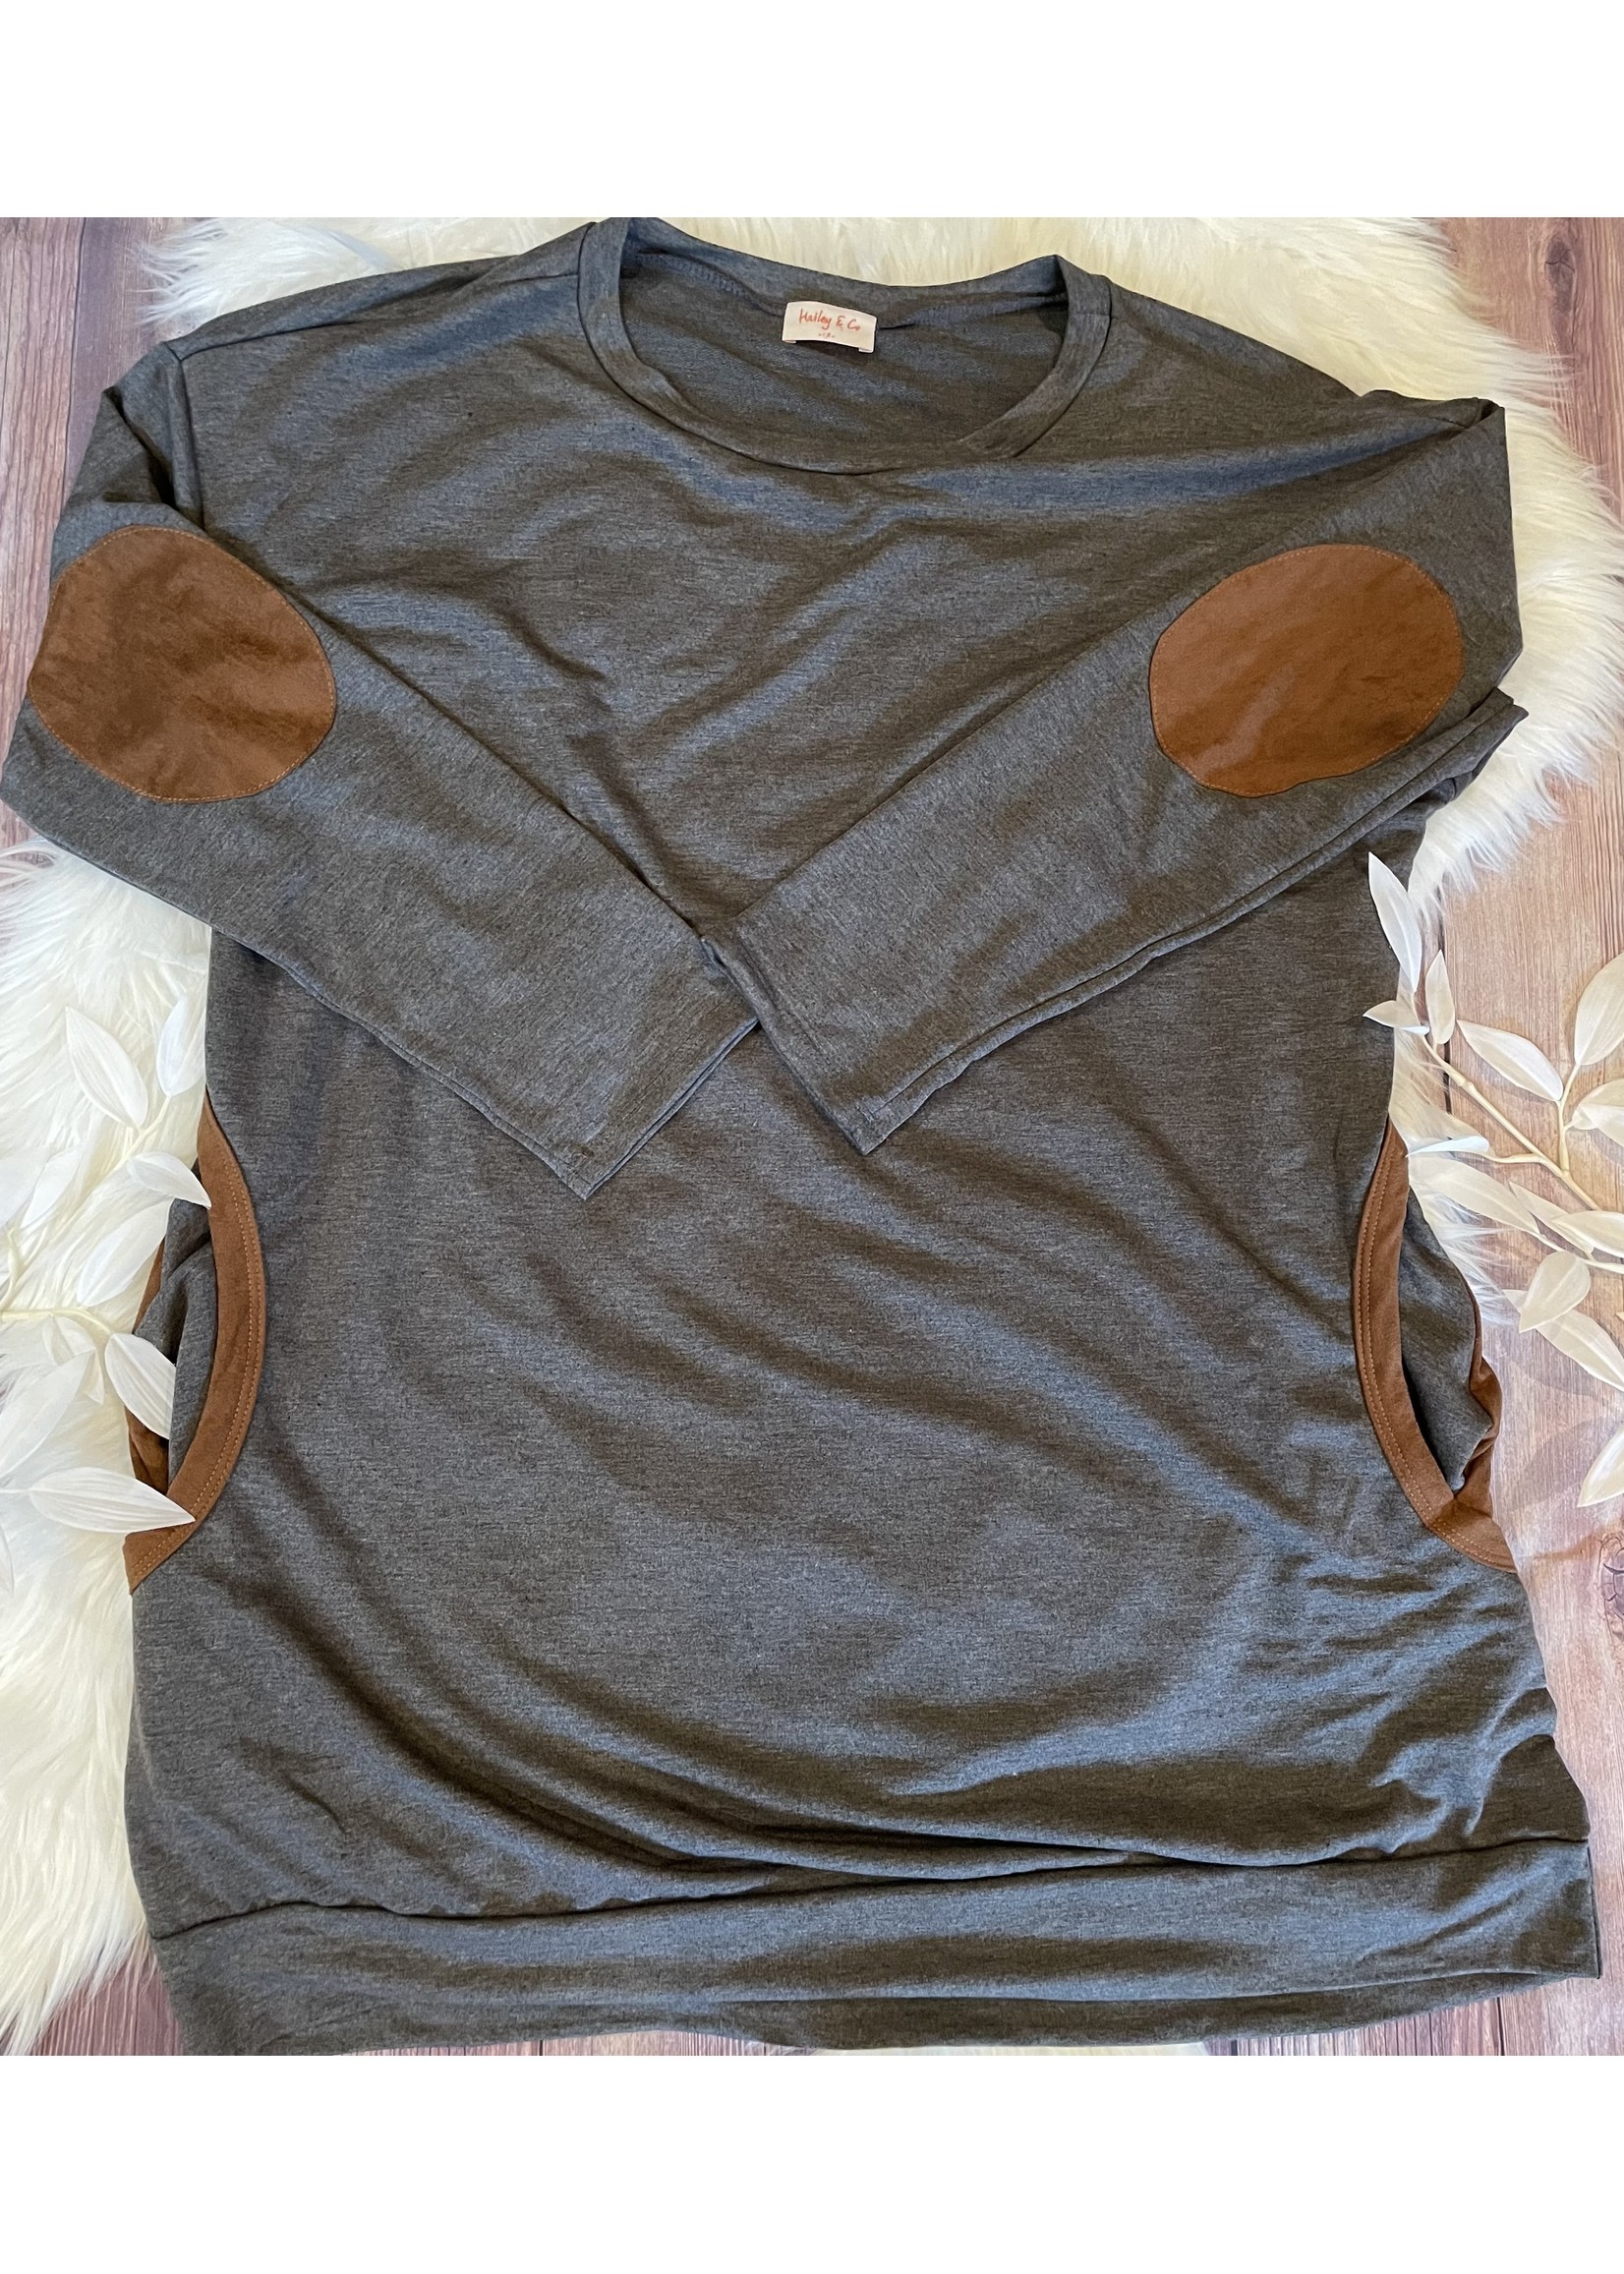 Charcoal and Brown Elbow Patch Top